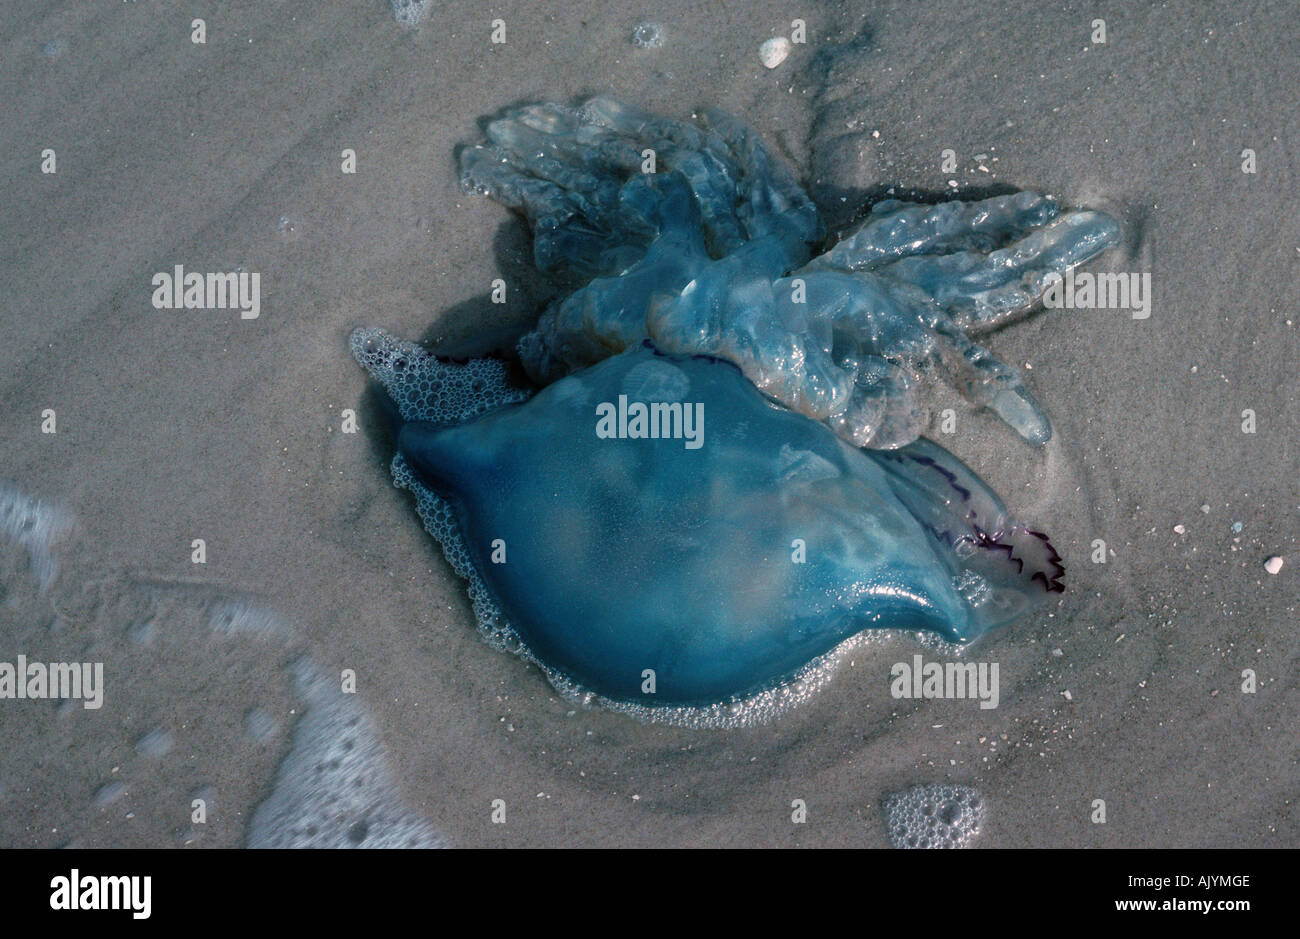 Root-mouthed Jellyfish / Wurzelmundqualle Stock Photo